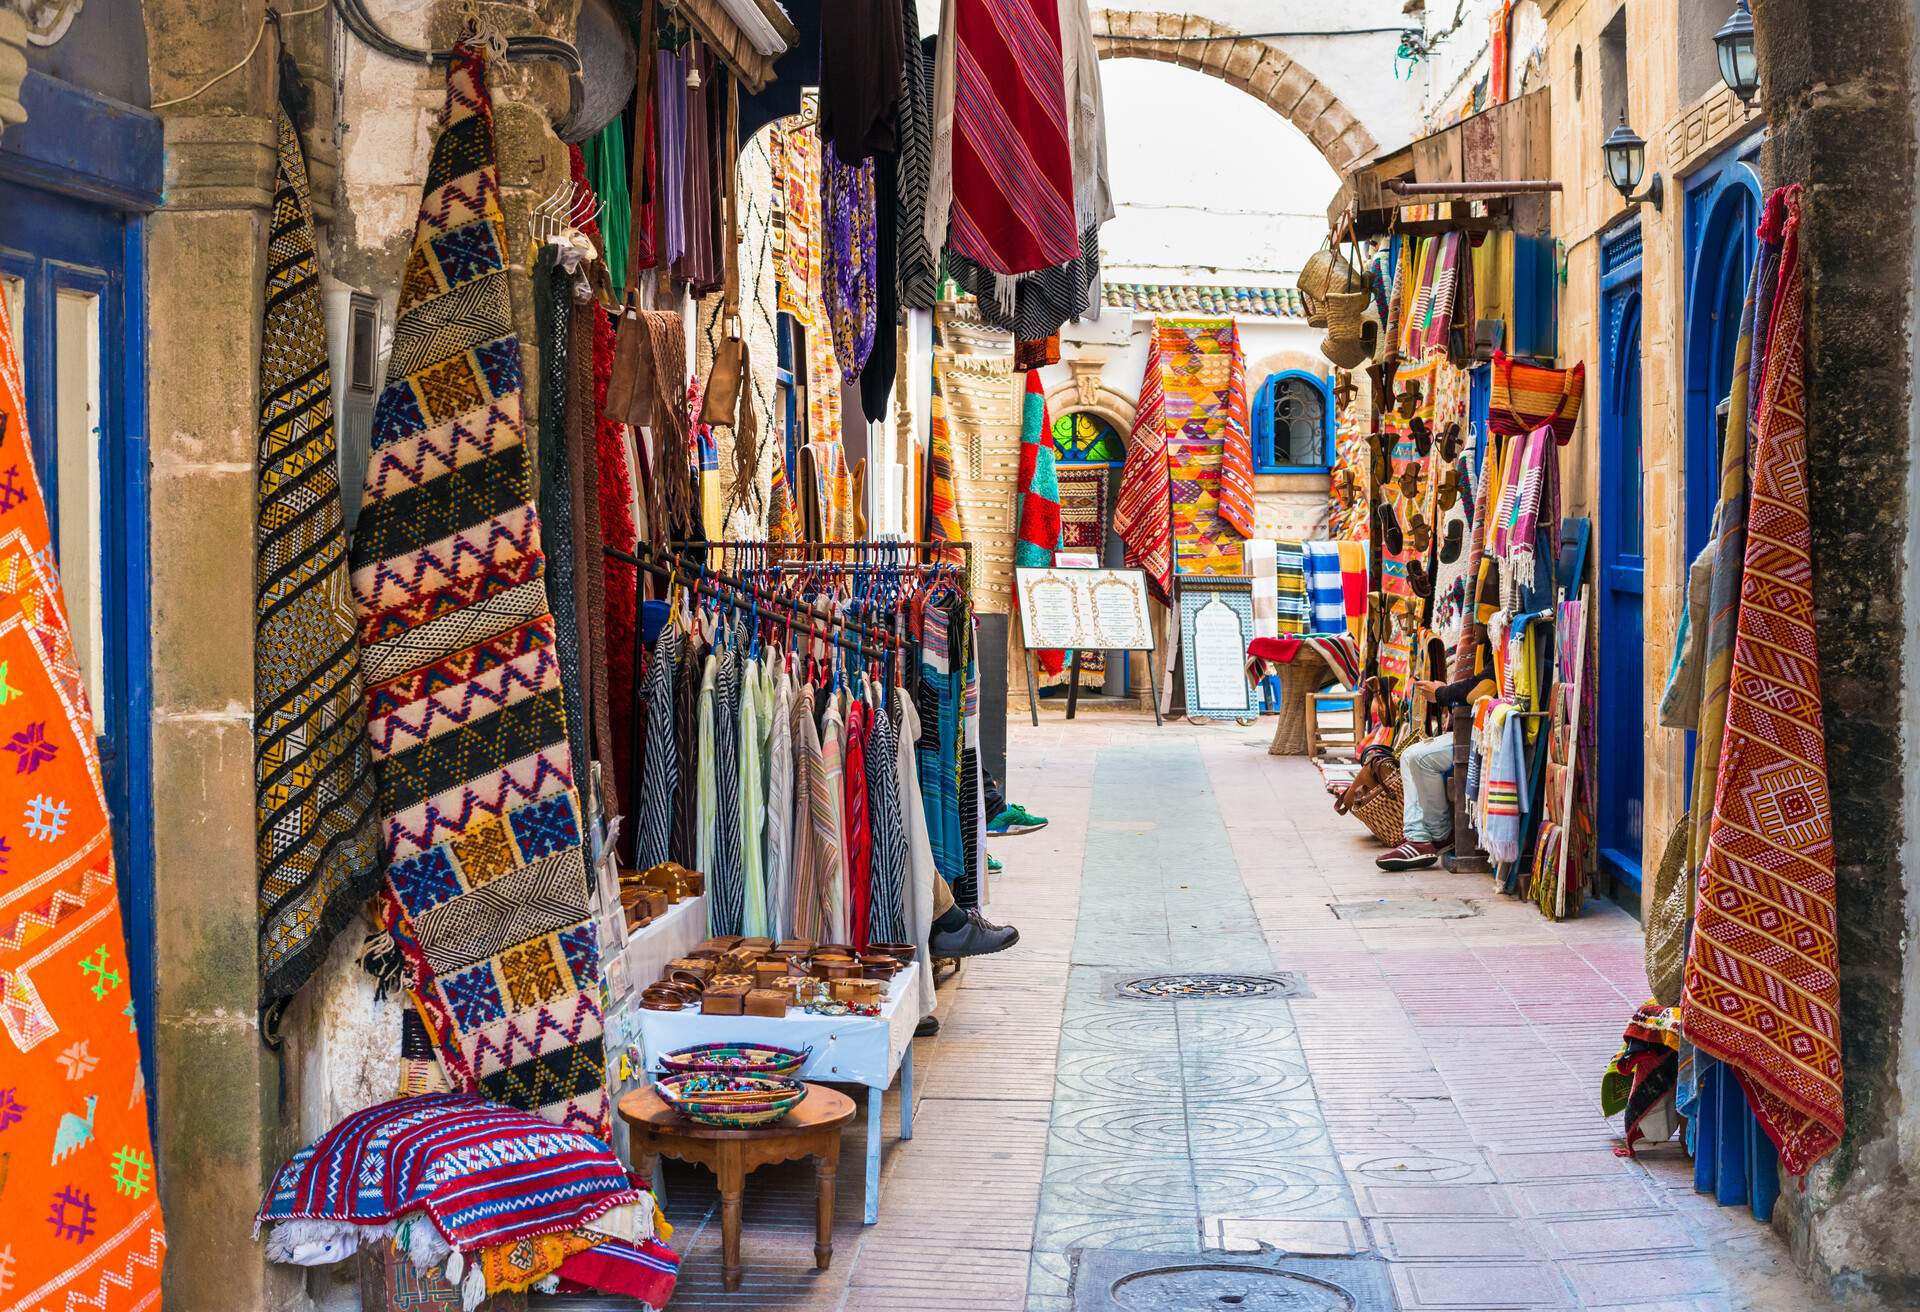 Moroccan handmade crafts, carpets and bags hanging in the narrow street of Essaouira in Morocco with selective focus; Shutterstock ID 790133260; SF SSA Case with Manager Approval: SF6759285; Job: ; Client/Licensee: ; Other: